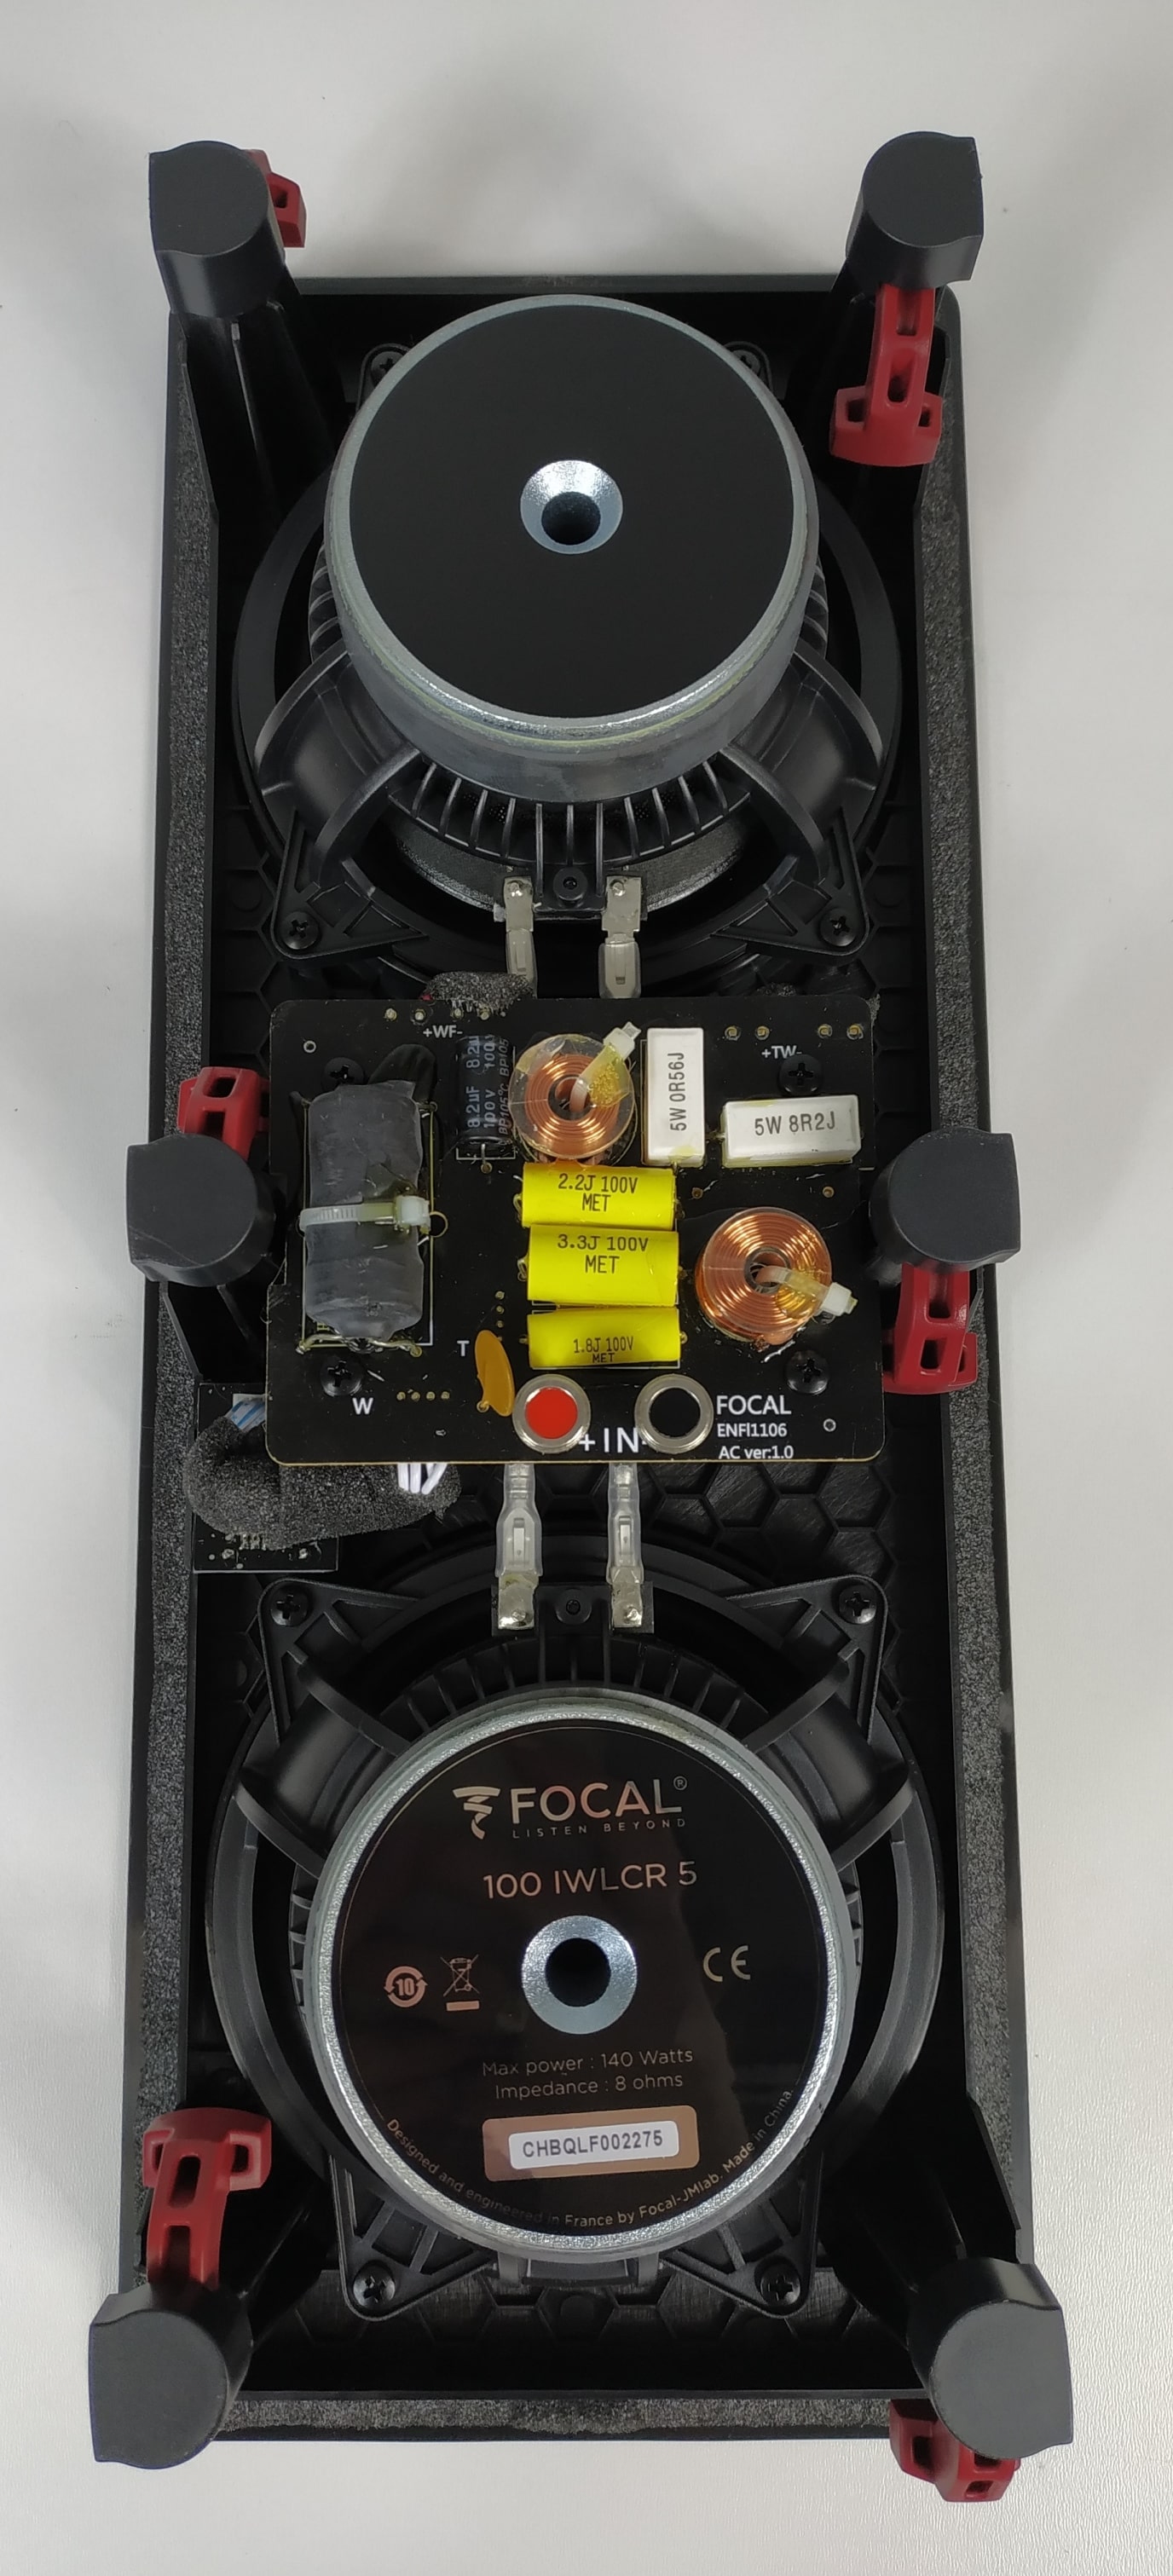 Focal 100IW5LCR back